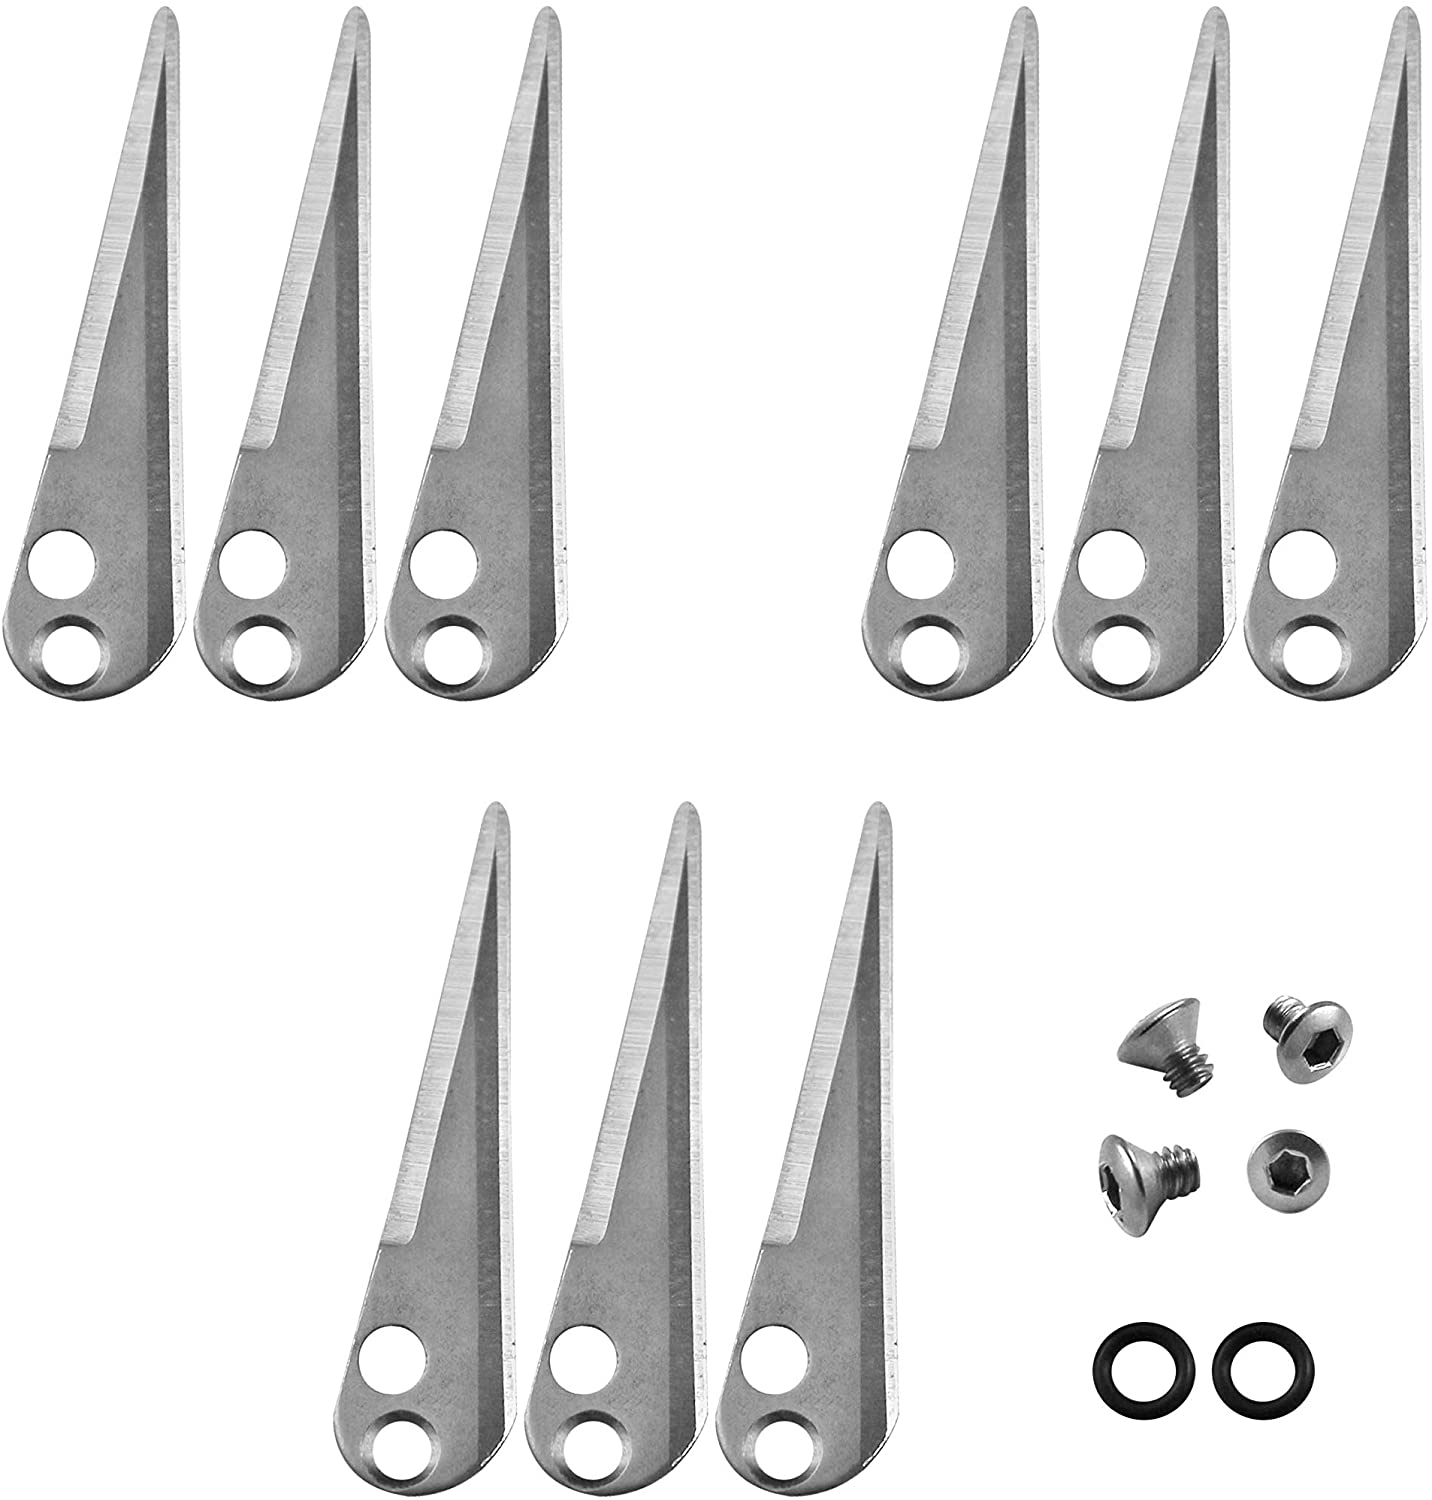 RAMCAT 125 Grain Broadheads Replacement Blades (9 Count), Small, Silver - RCR4001